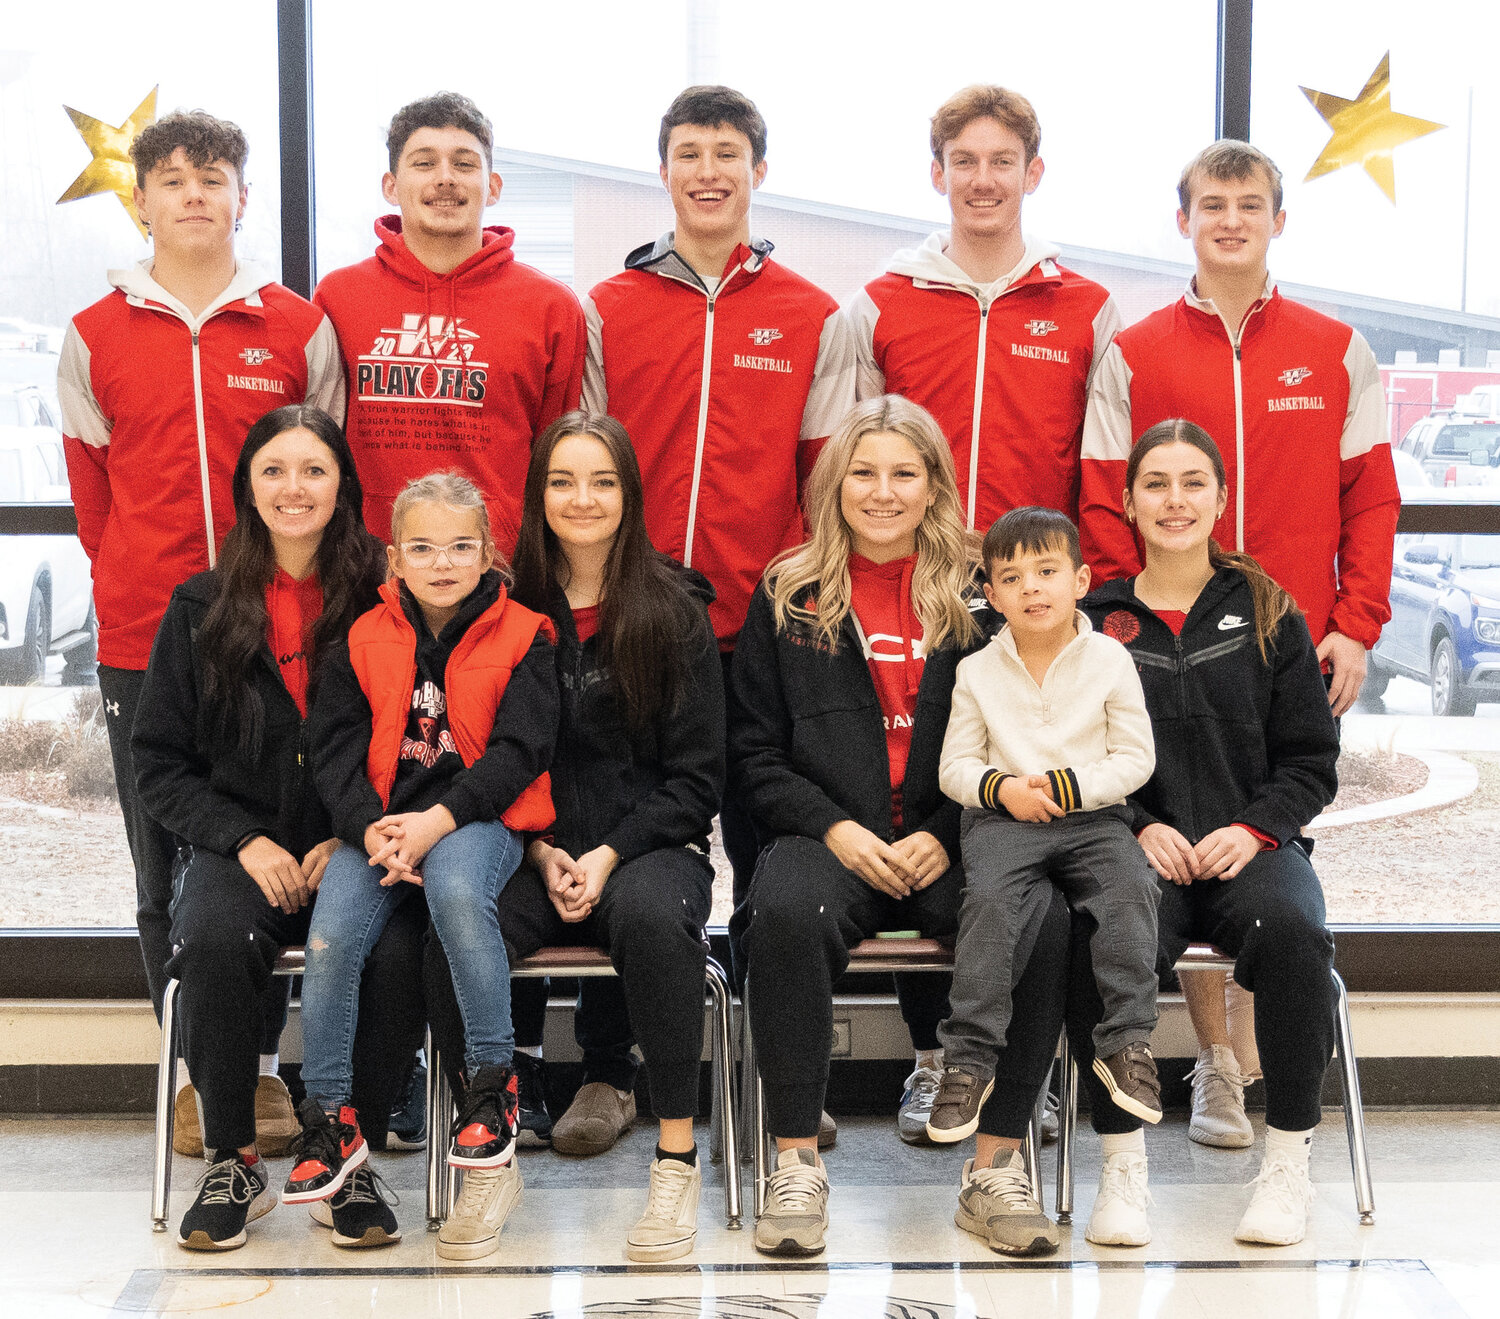 Washington High School will hold homecoming coronation Friday at 5:55 p.m. at the Warrior Event Center. Members of the homecoming court, from front left, include Kelby Beller, flower girl Jentrie Simon, Brinley Thomas, Shelbie Caveness, crown bearer Tucker Scholz and Bella Andrews. On the back row, from left, are Kade Norman, Jace Cole, Jeremiah Tontz, Noah Ladlee and Cole Beller. Cage Morris is not pictured.